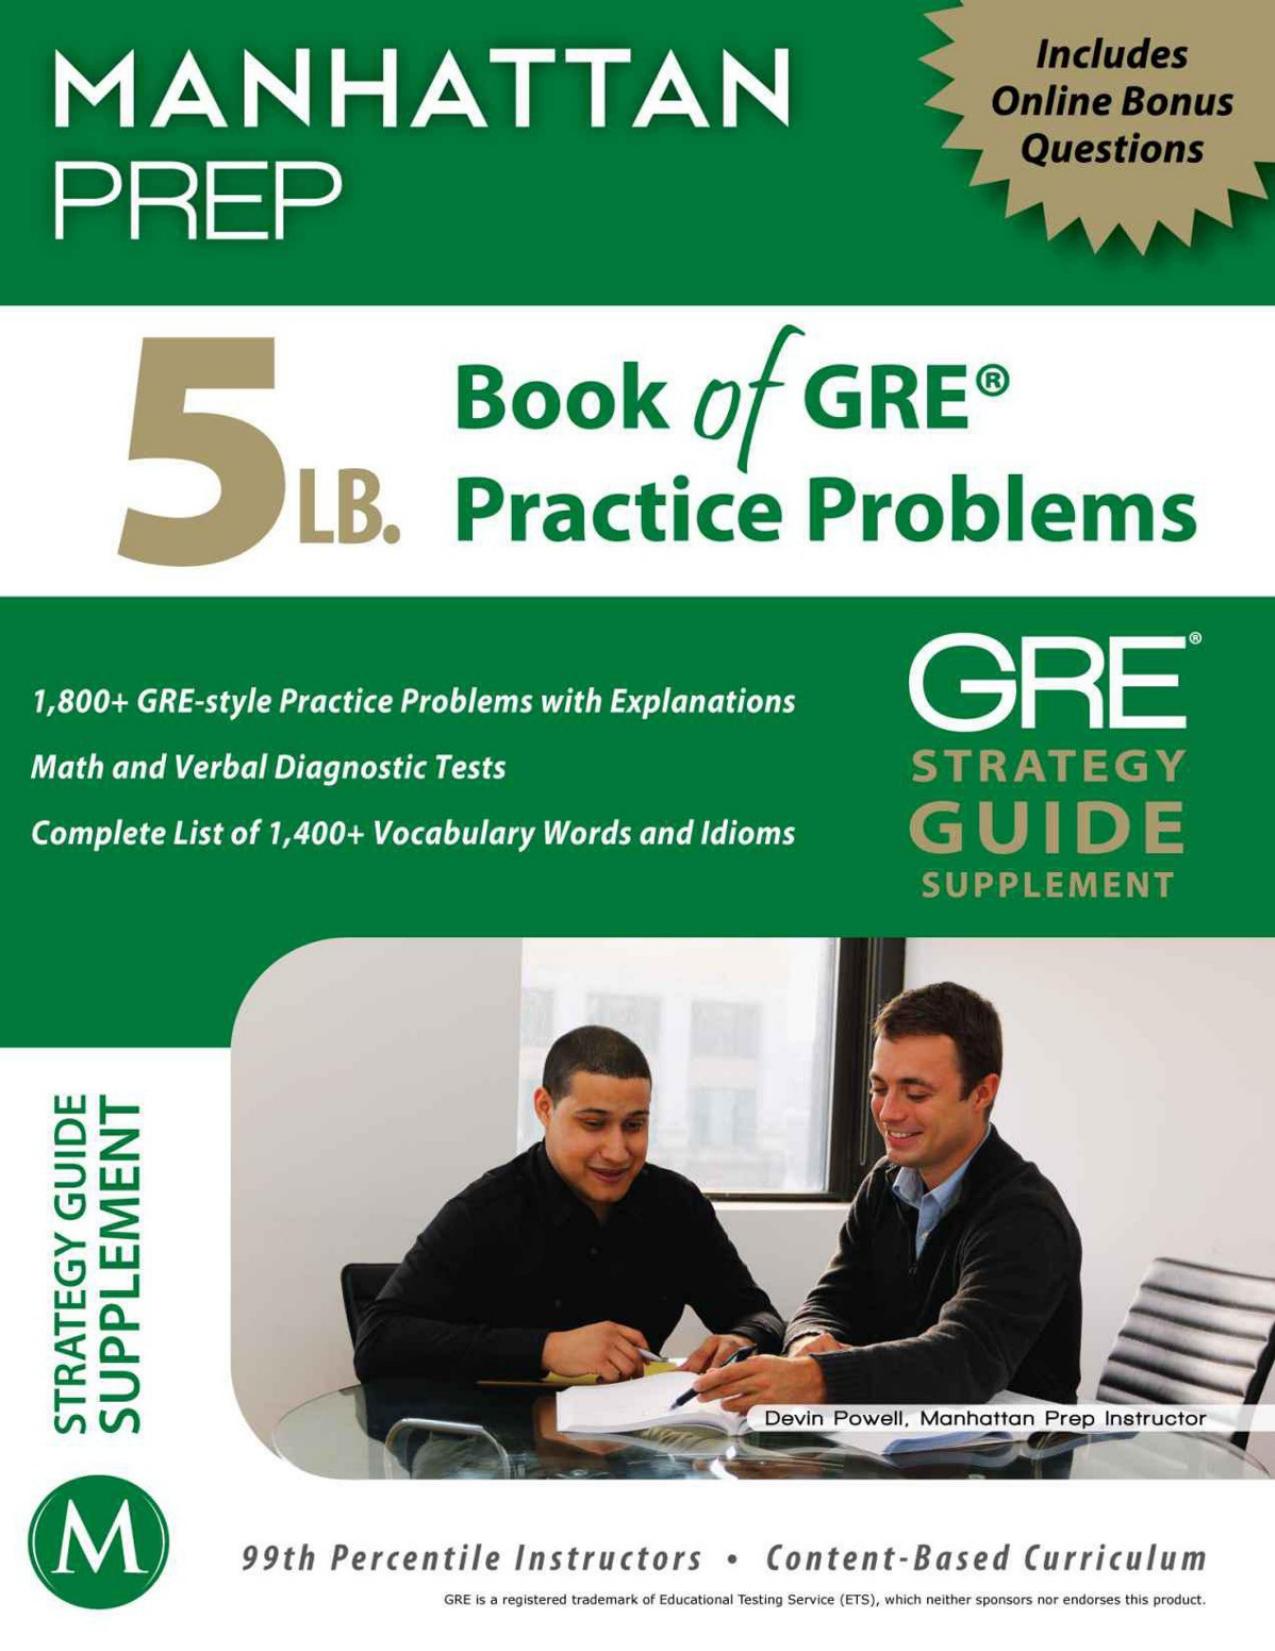 5 lb. Book of GRE Practice Problems by Manhattan Prep